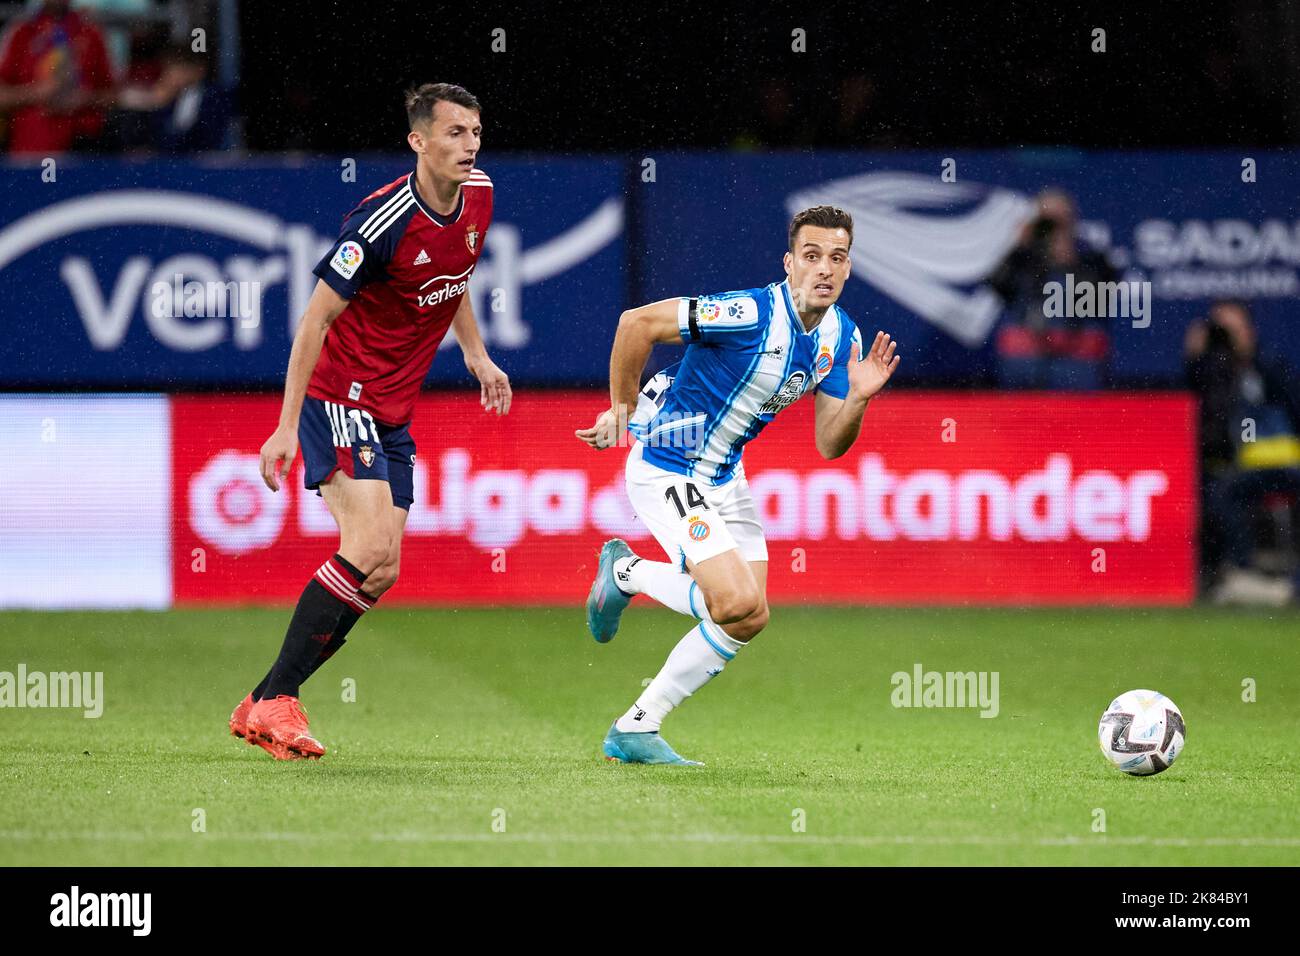 Pamplona, Spain. 20th Oct, 2022. PAMPLONA, SPAIN - OCTOBER 20: Brian Olivan of RCD Espanyol competes for the ball with Ante Budimir of CA Osasuna during the La Liga Santander match between CA Osasuna and RCD Espanyol on October 20, 2022 at El Sadar in Pamplona, Spain. (Photo by Ricardo Larreina/AFLO) Credit: Aflo Co. Ltd./Alamy Live News Stock Photo